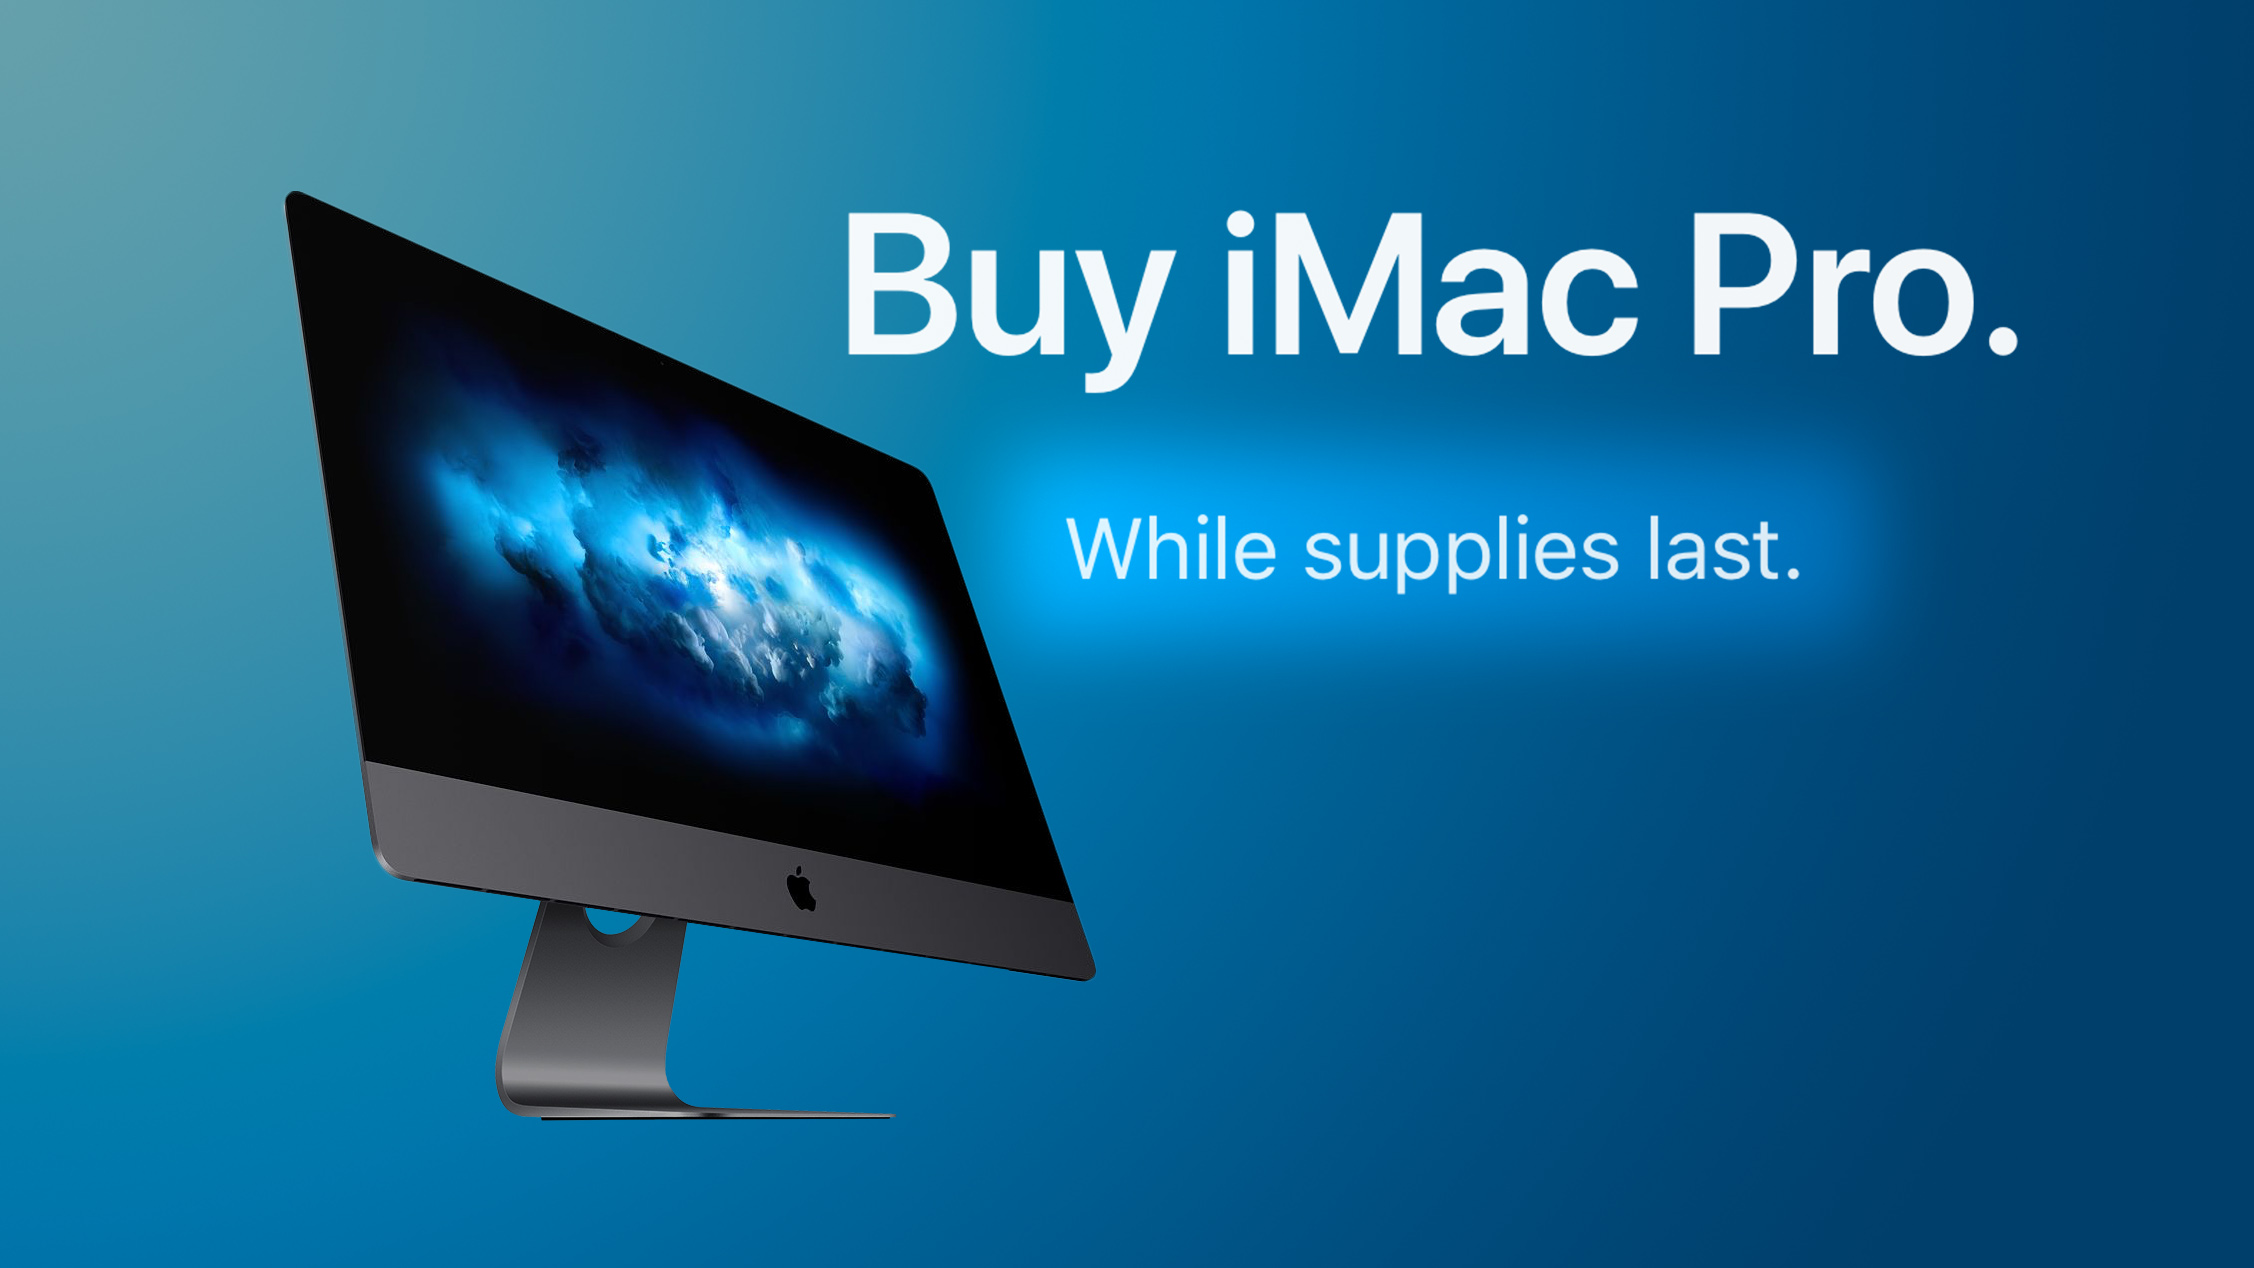 Buy iMac Pro While Supplies Last Feature3